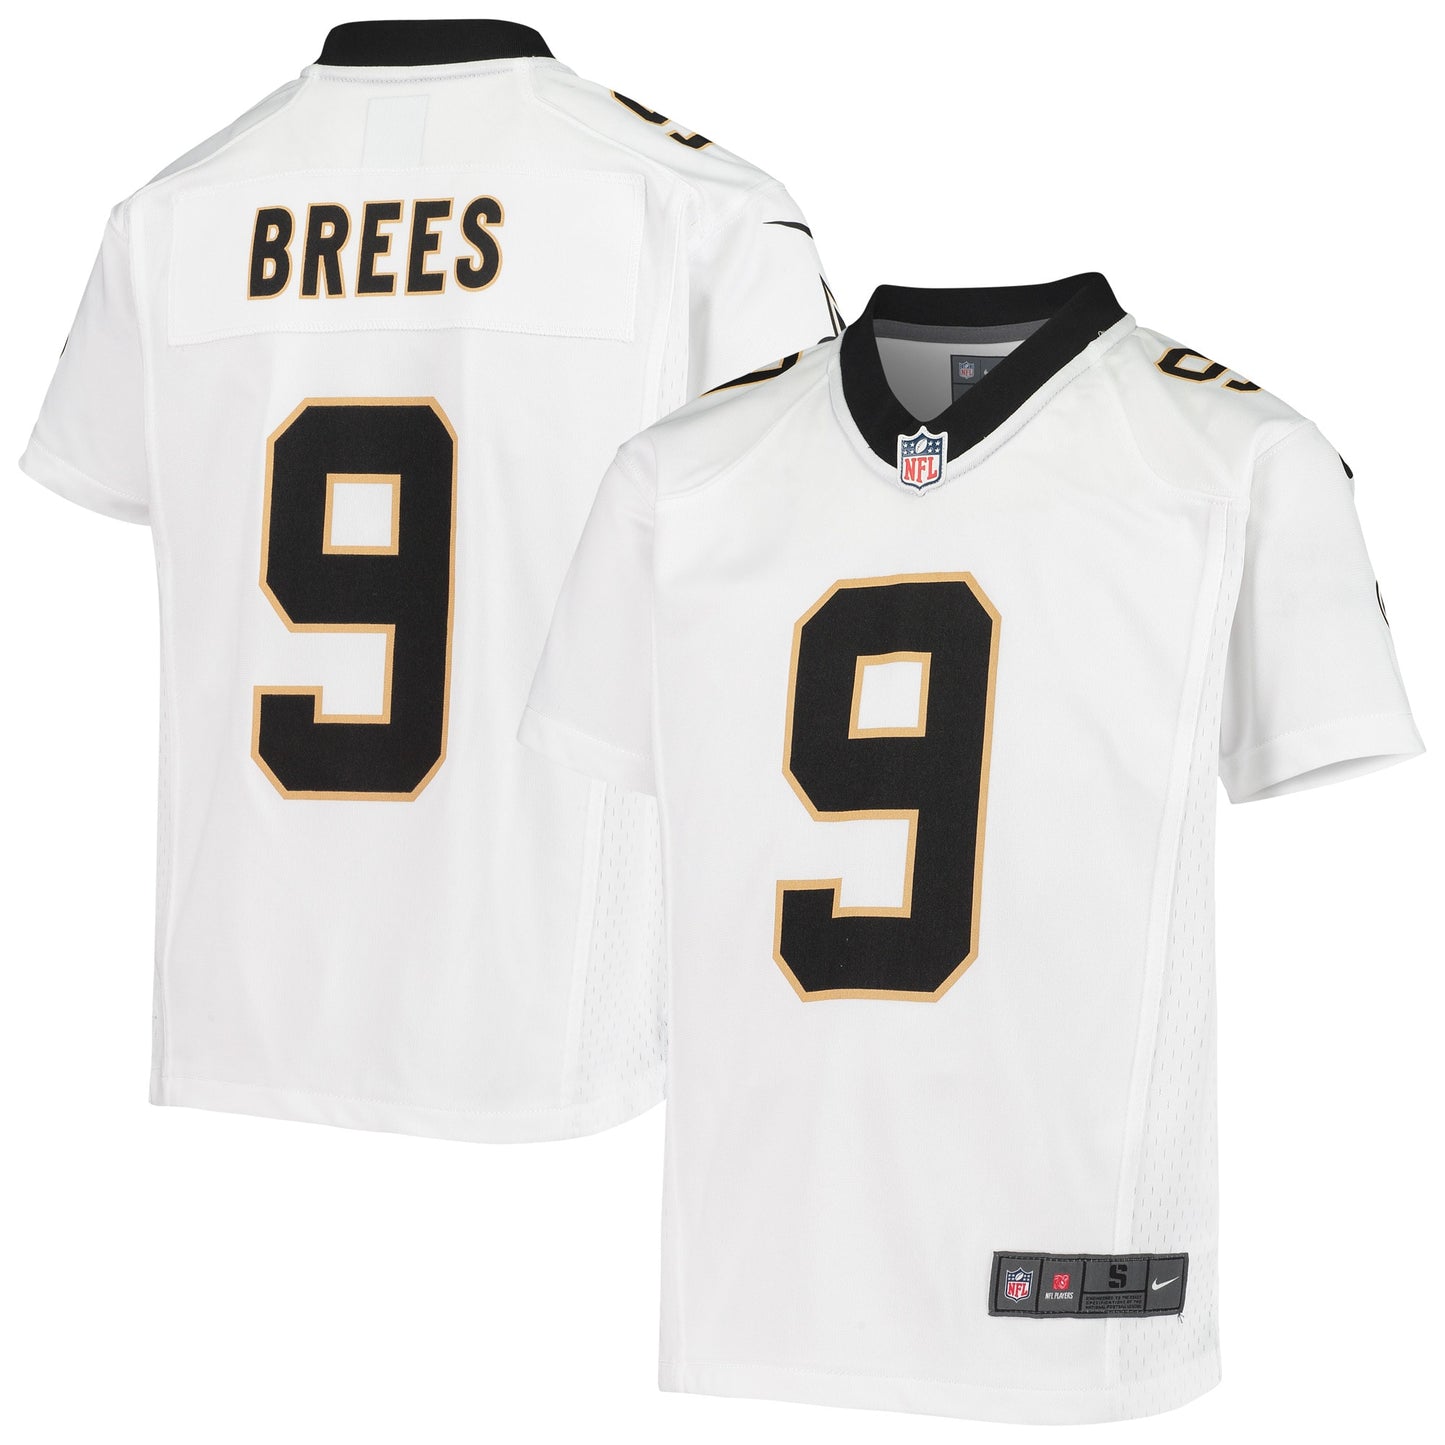 Drew Brees New Orleans Saints Nike Youth Game Jersey - White